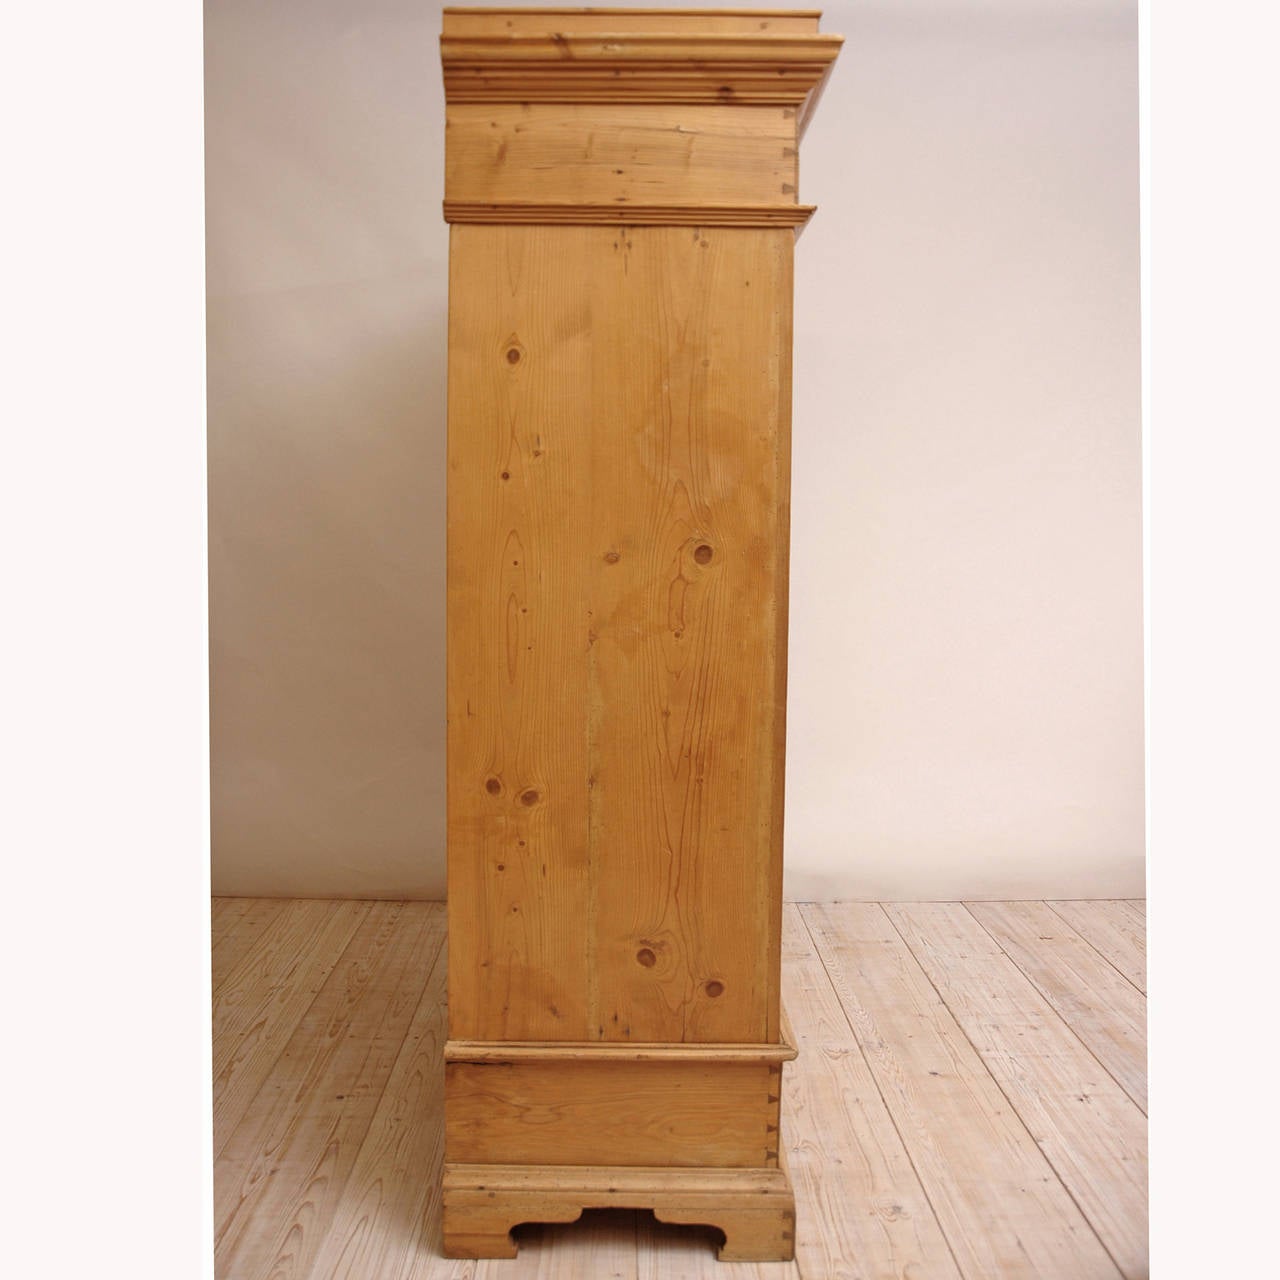 19th Century Neoclassical Pine Armoire, circa early 1800's